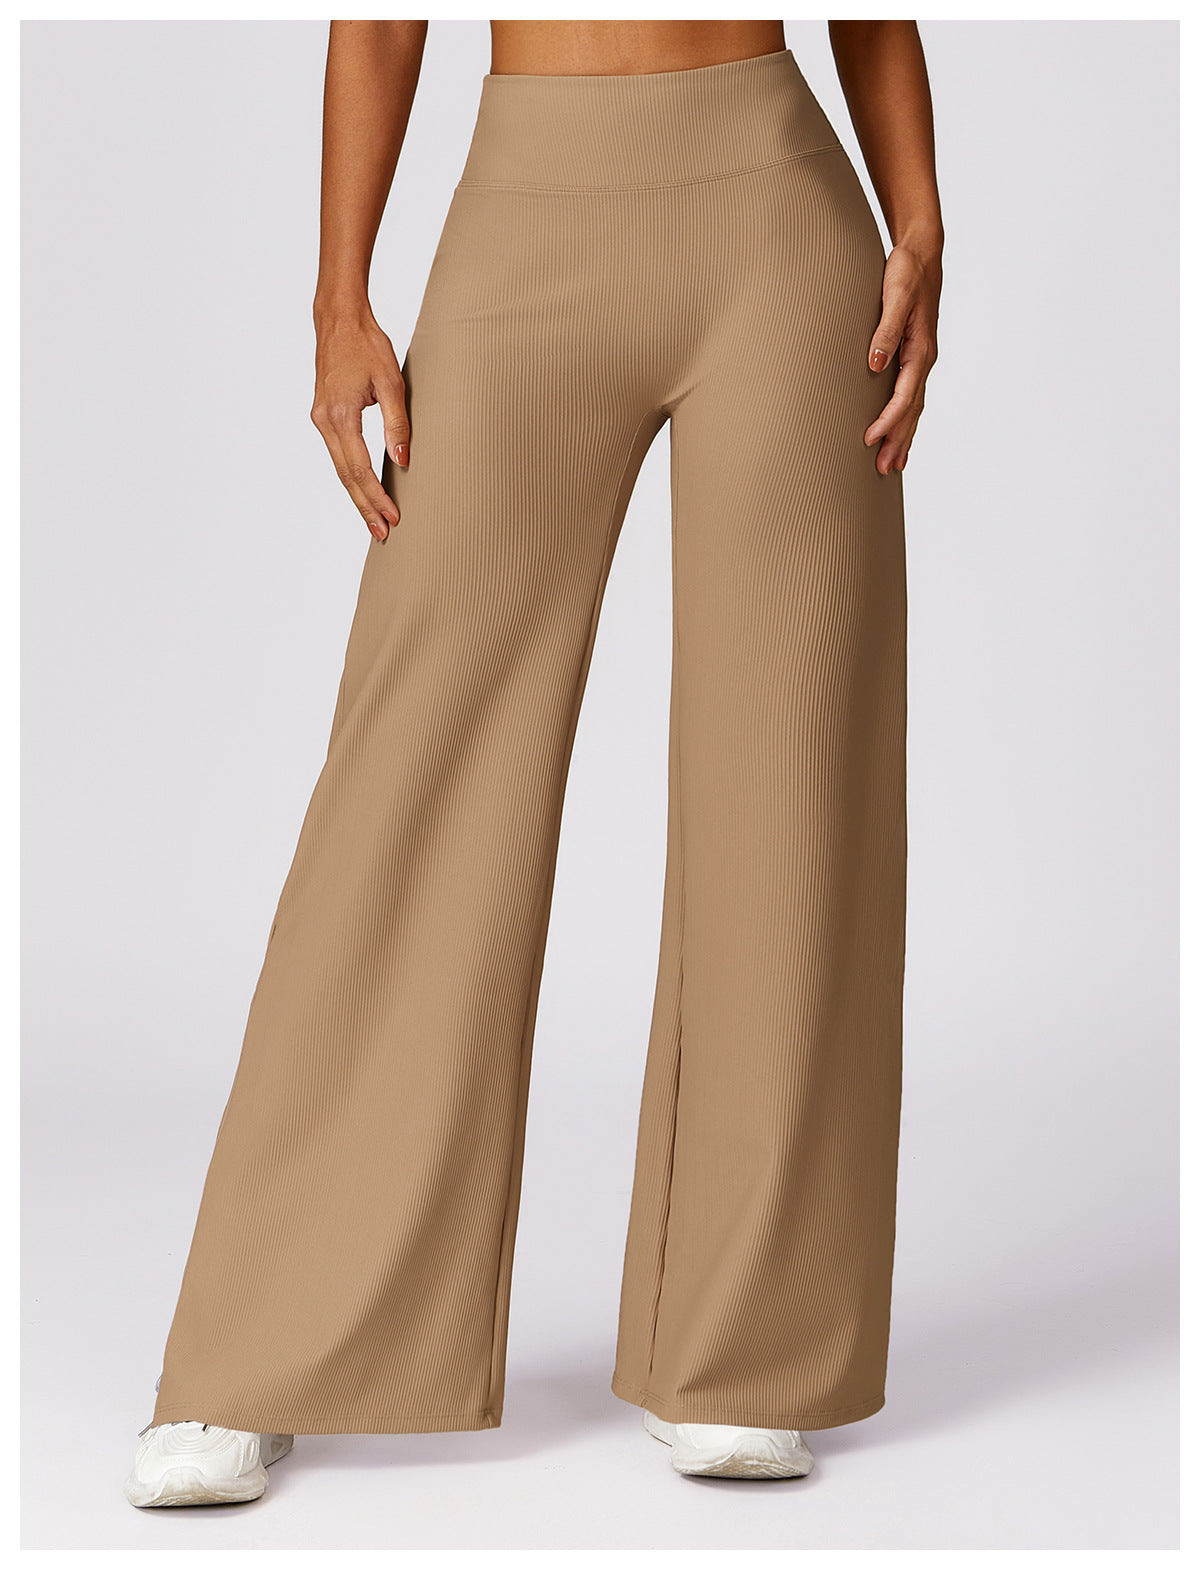 Thread High Waist Casual Straight Wide Leg Quick-drying Loose Track Pants